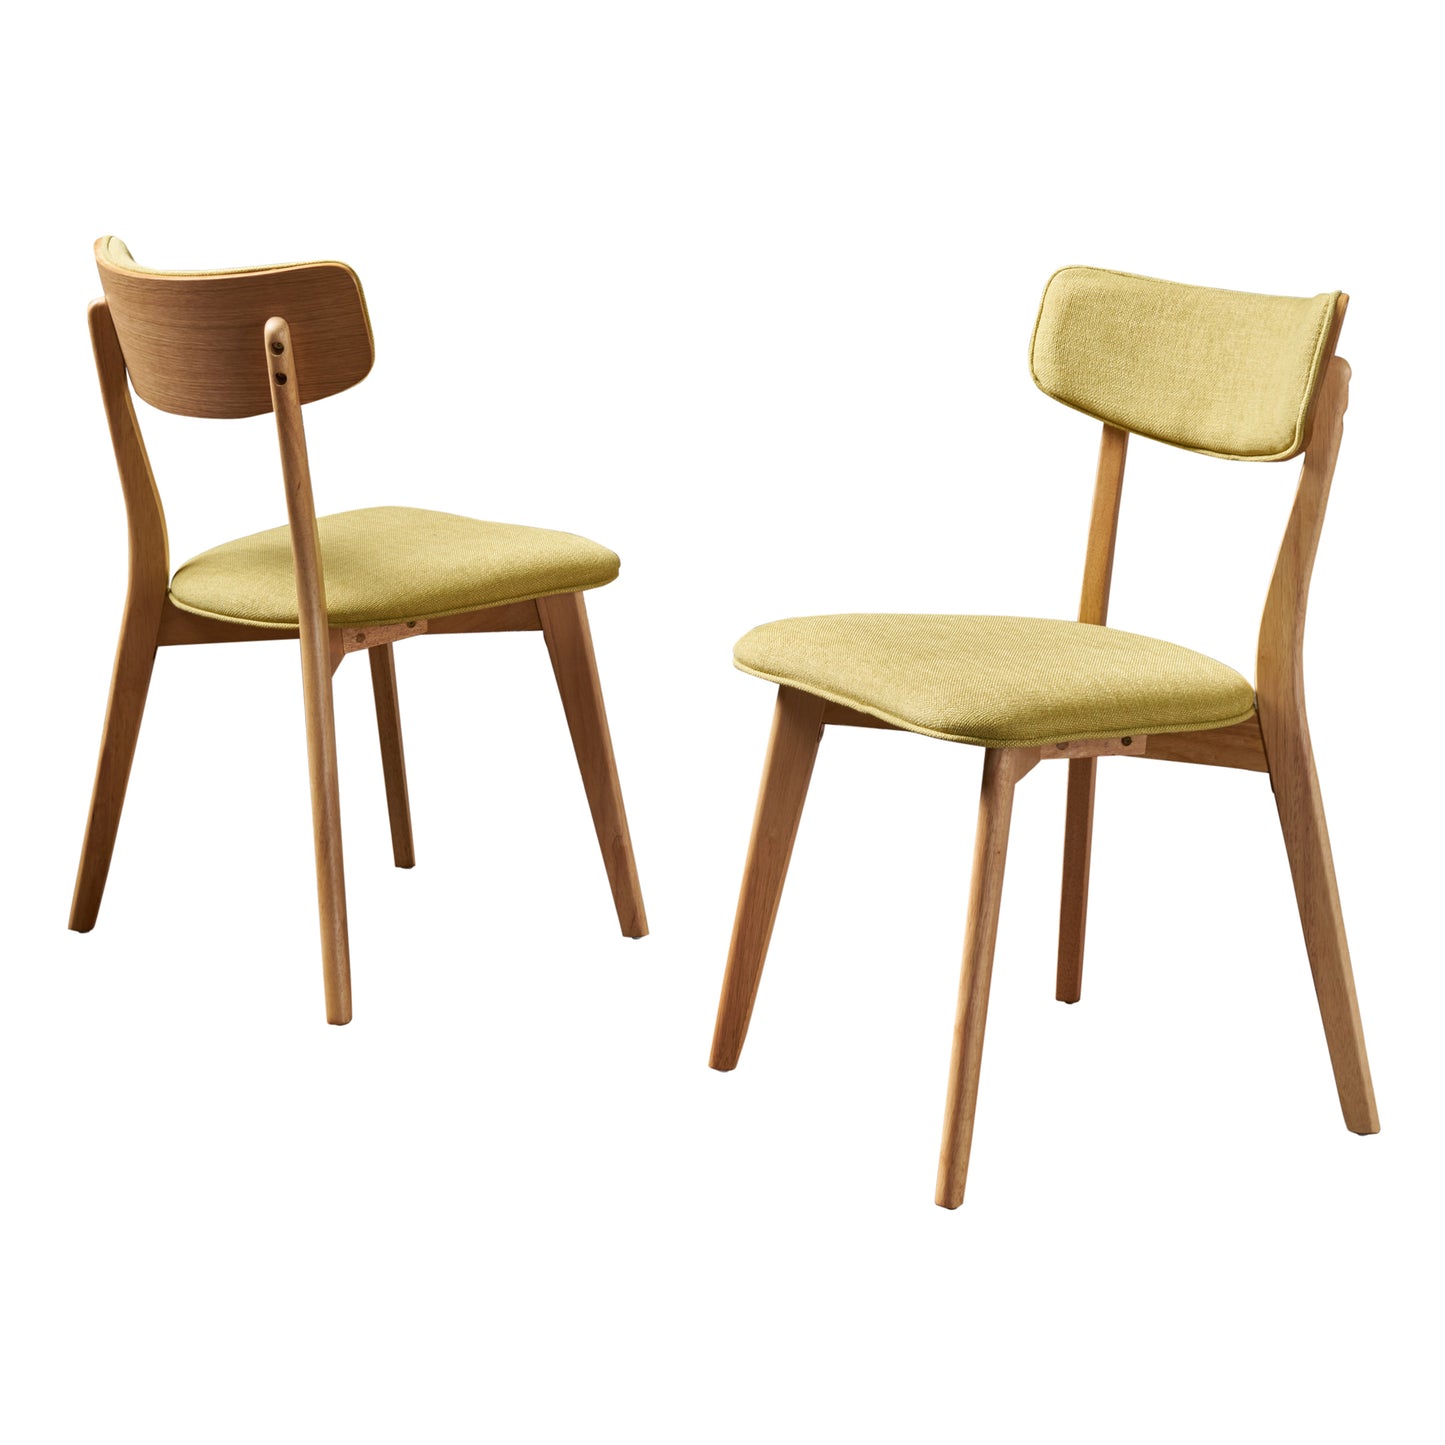 Turat Mid Century Fabric Dining Chairs with Natural Oak Finish(Set of 2)